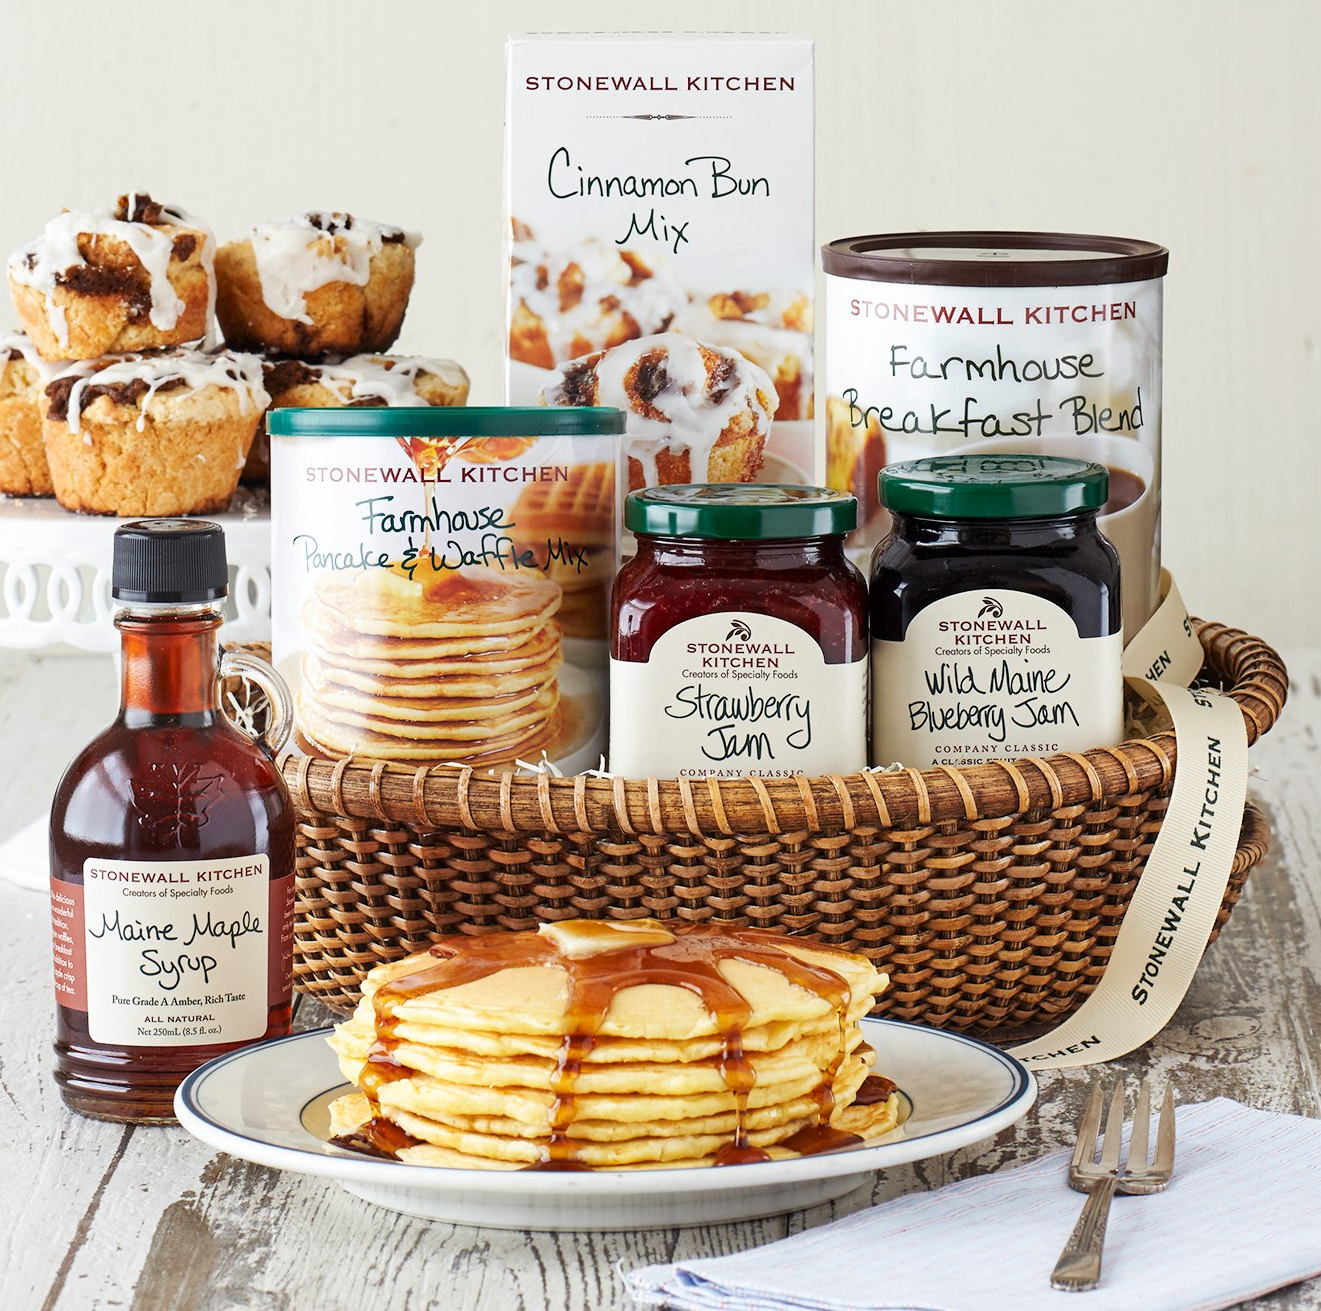 a plate of pancakes in front of a basket filled with Stonewall Kitchen branded maple syrup, pancake and cinnamon bun mix, coffee, and two flavors of jam 